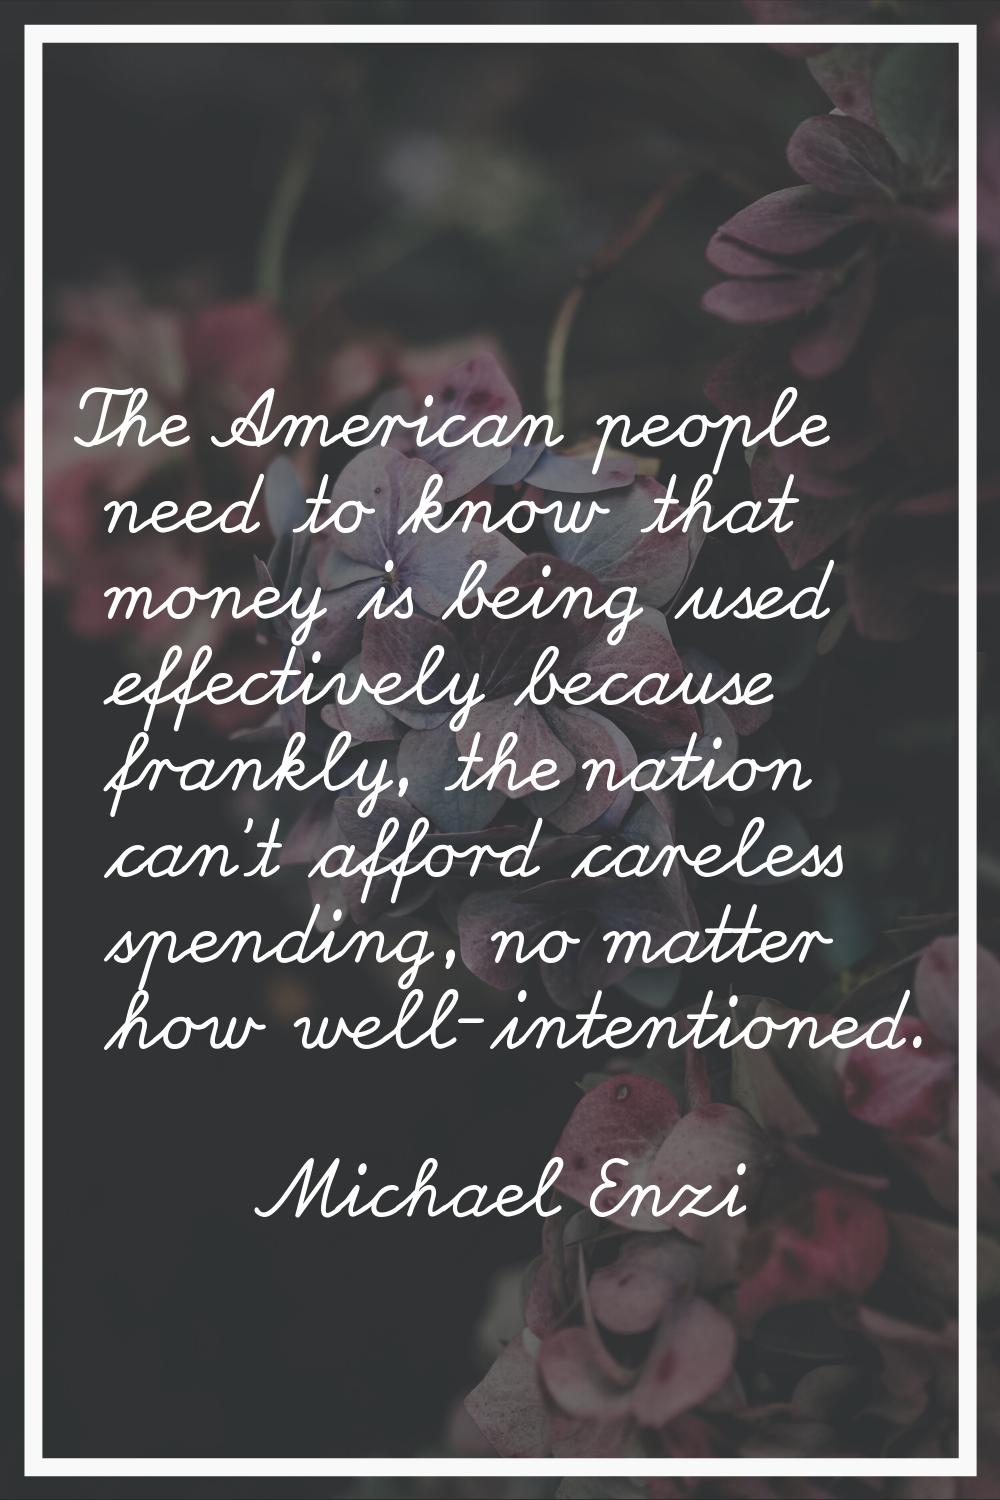 The American people need to know that money is being used effectively because frankly, the nation c